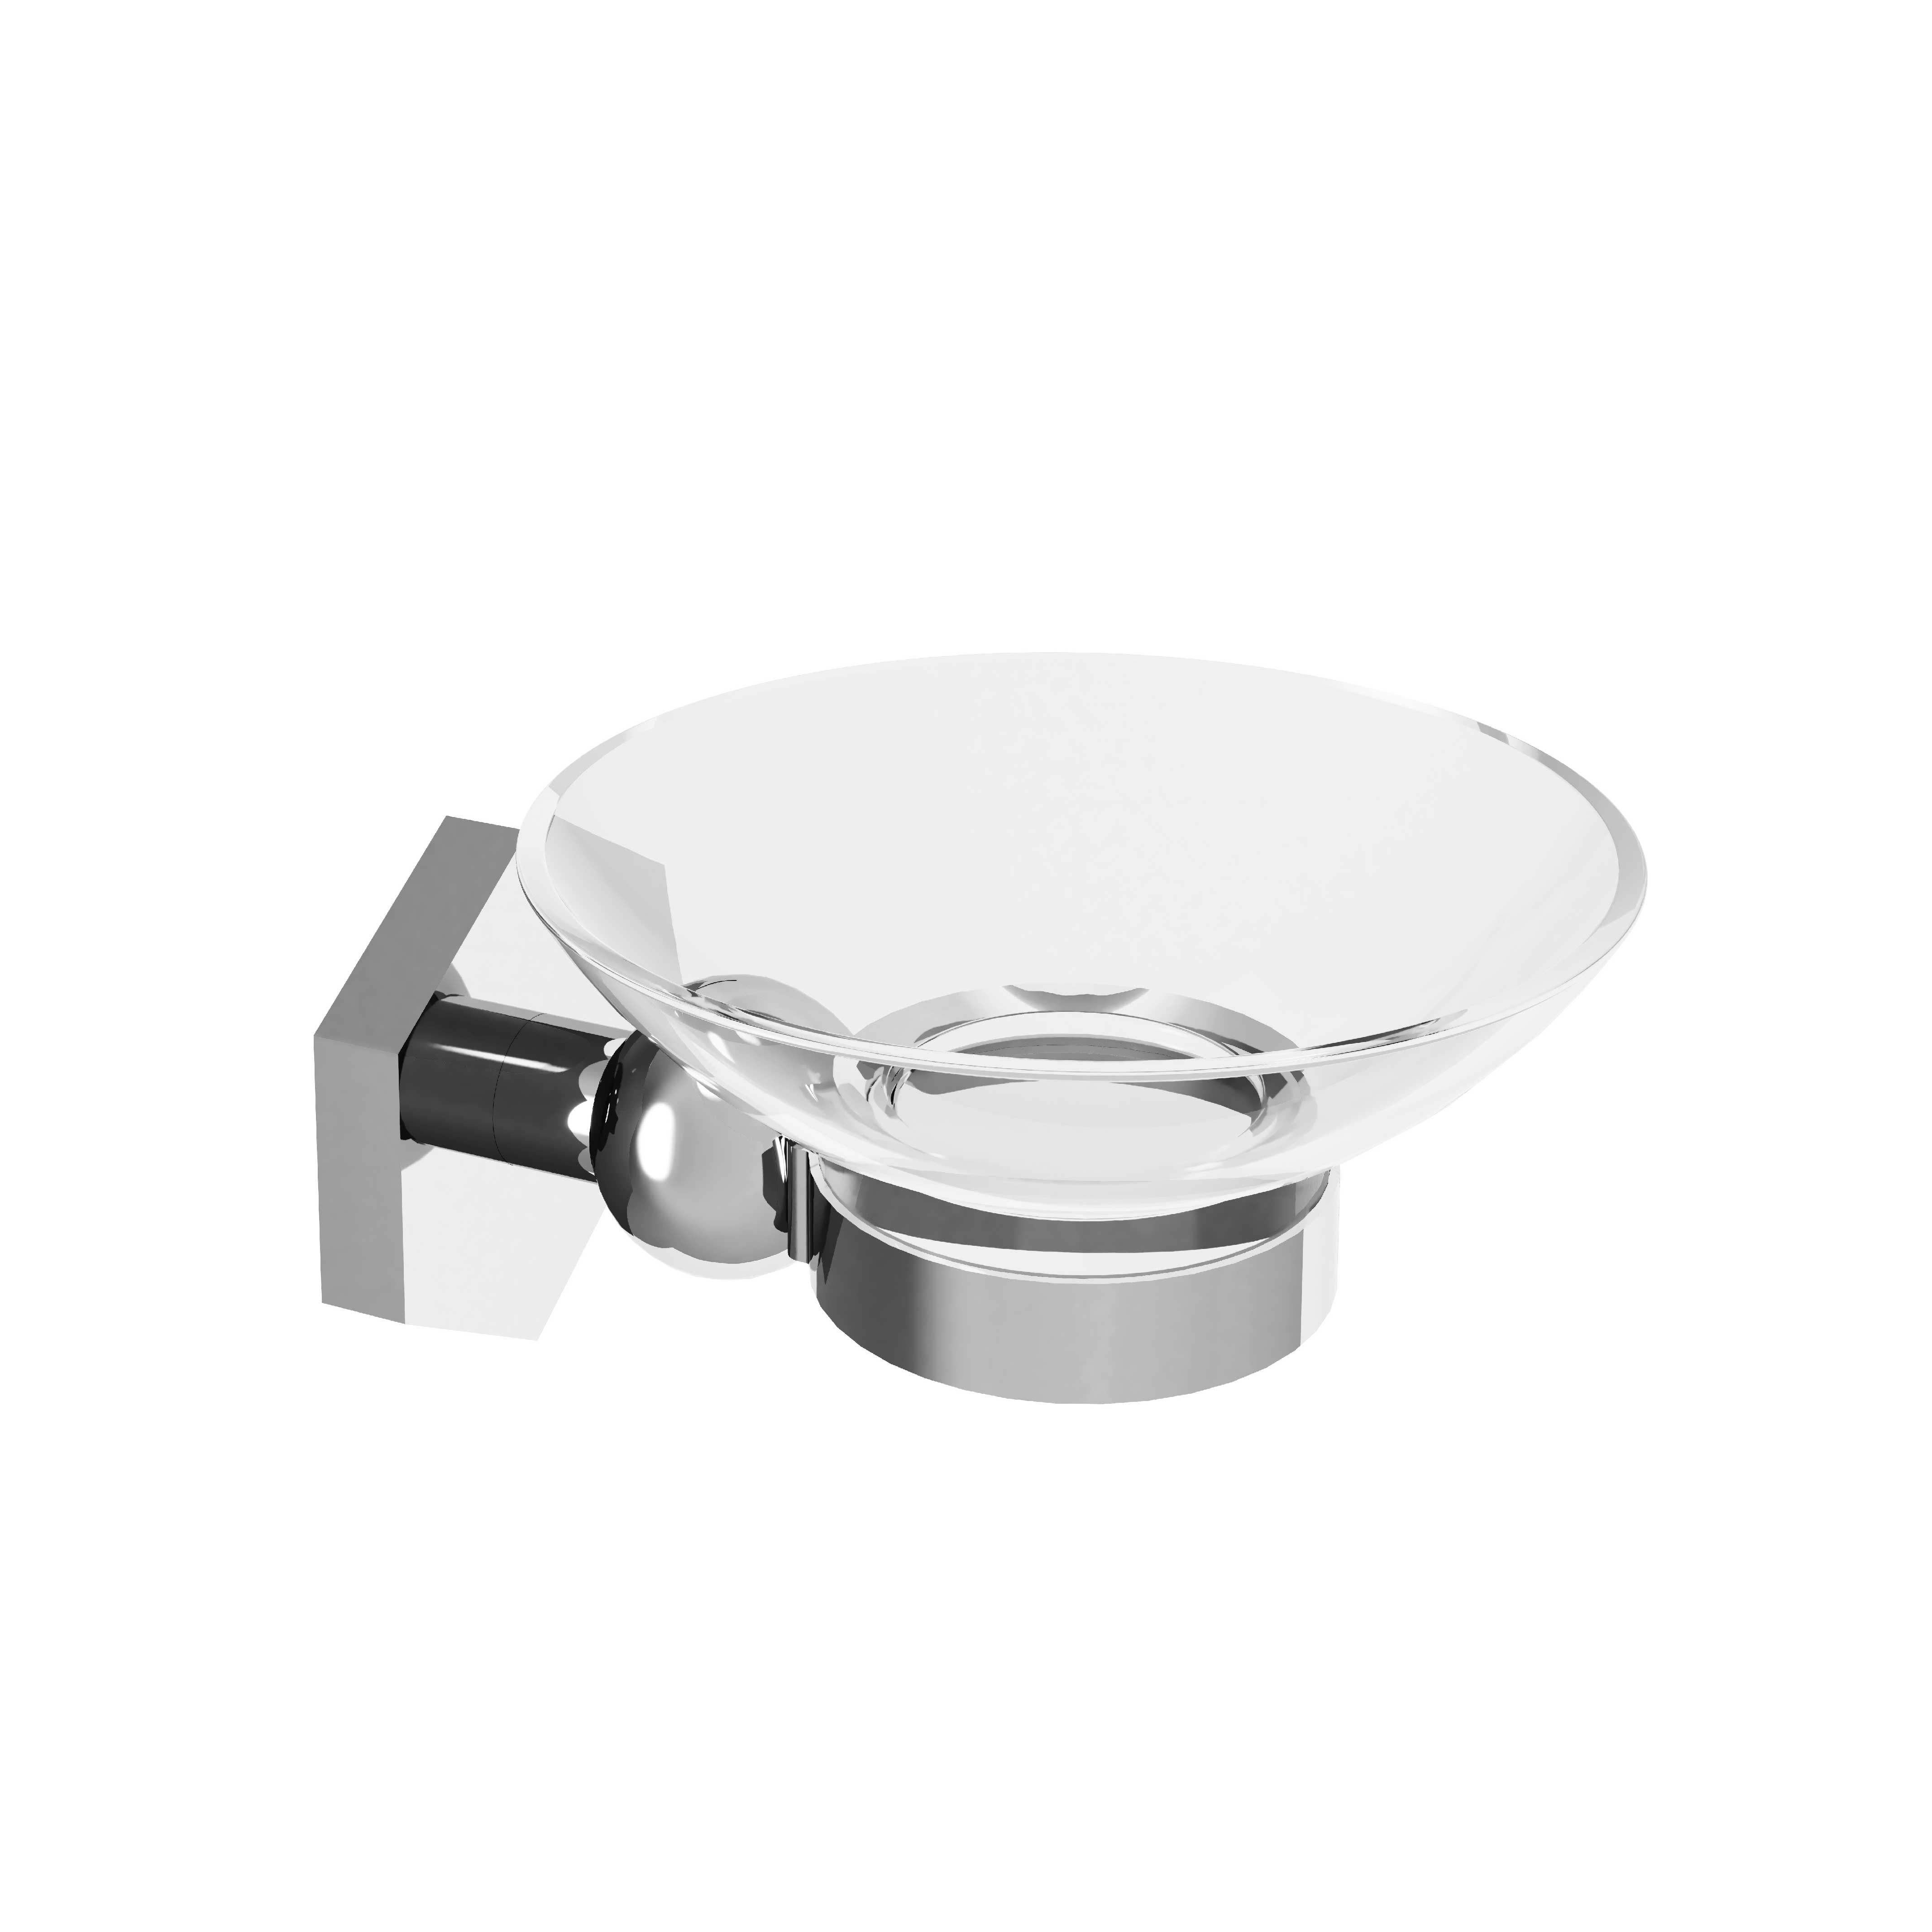 M32-515 Wall mounted soap dish holder